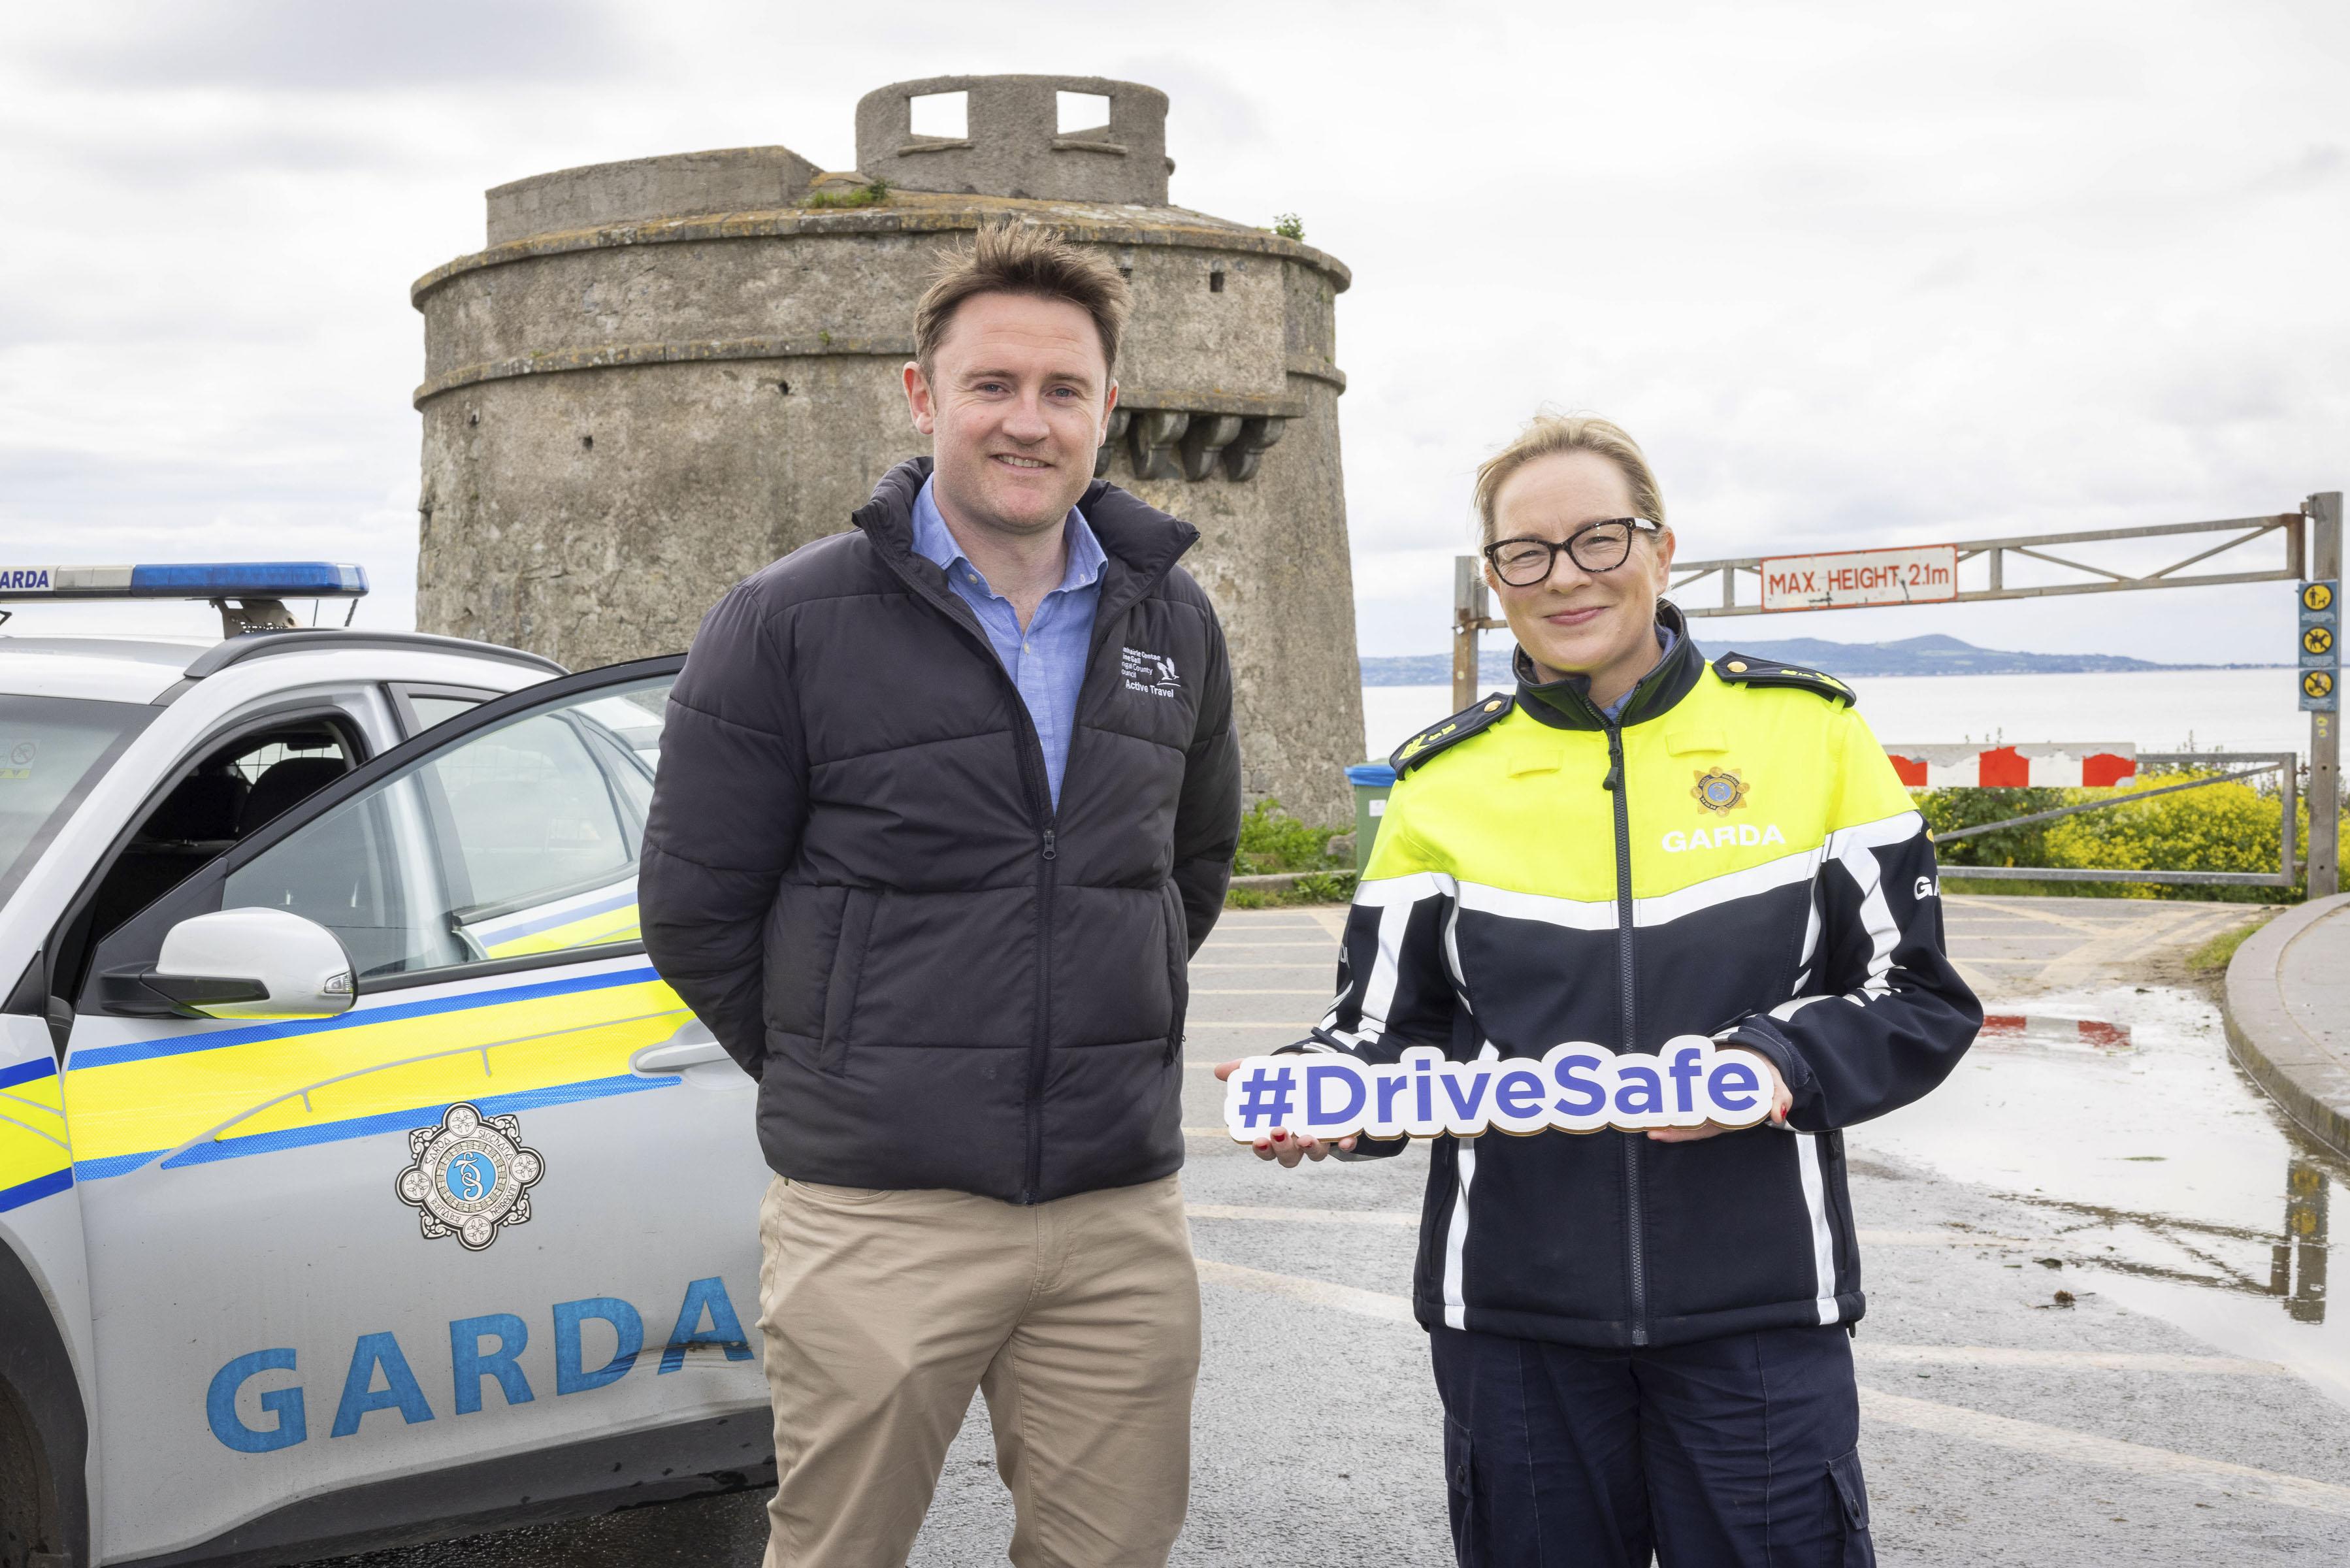 Garda and FCC staff member at Martello tower Donabate